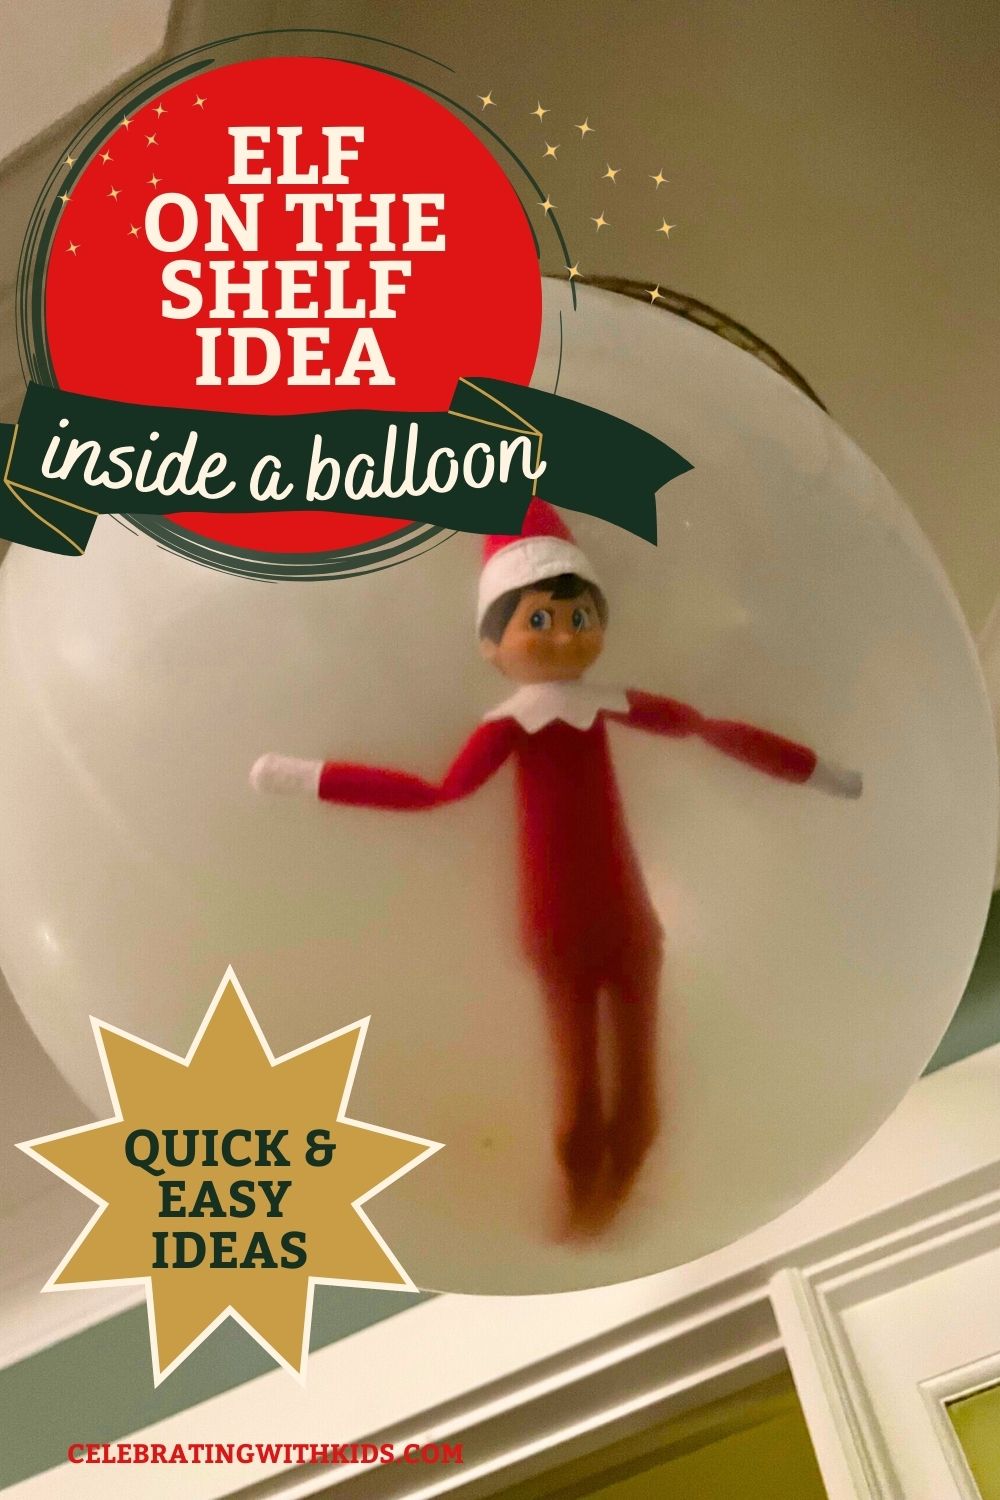 How to put an Elf on the Shelf inside a balloon - Celebrating with kids